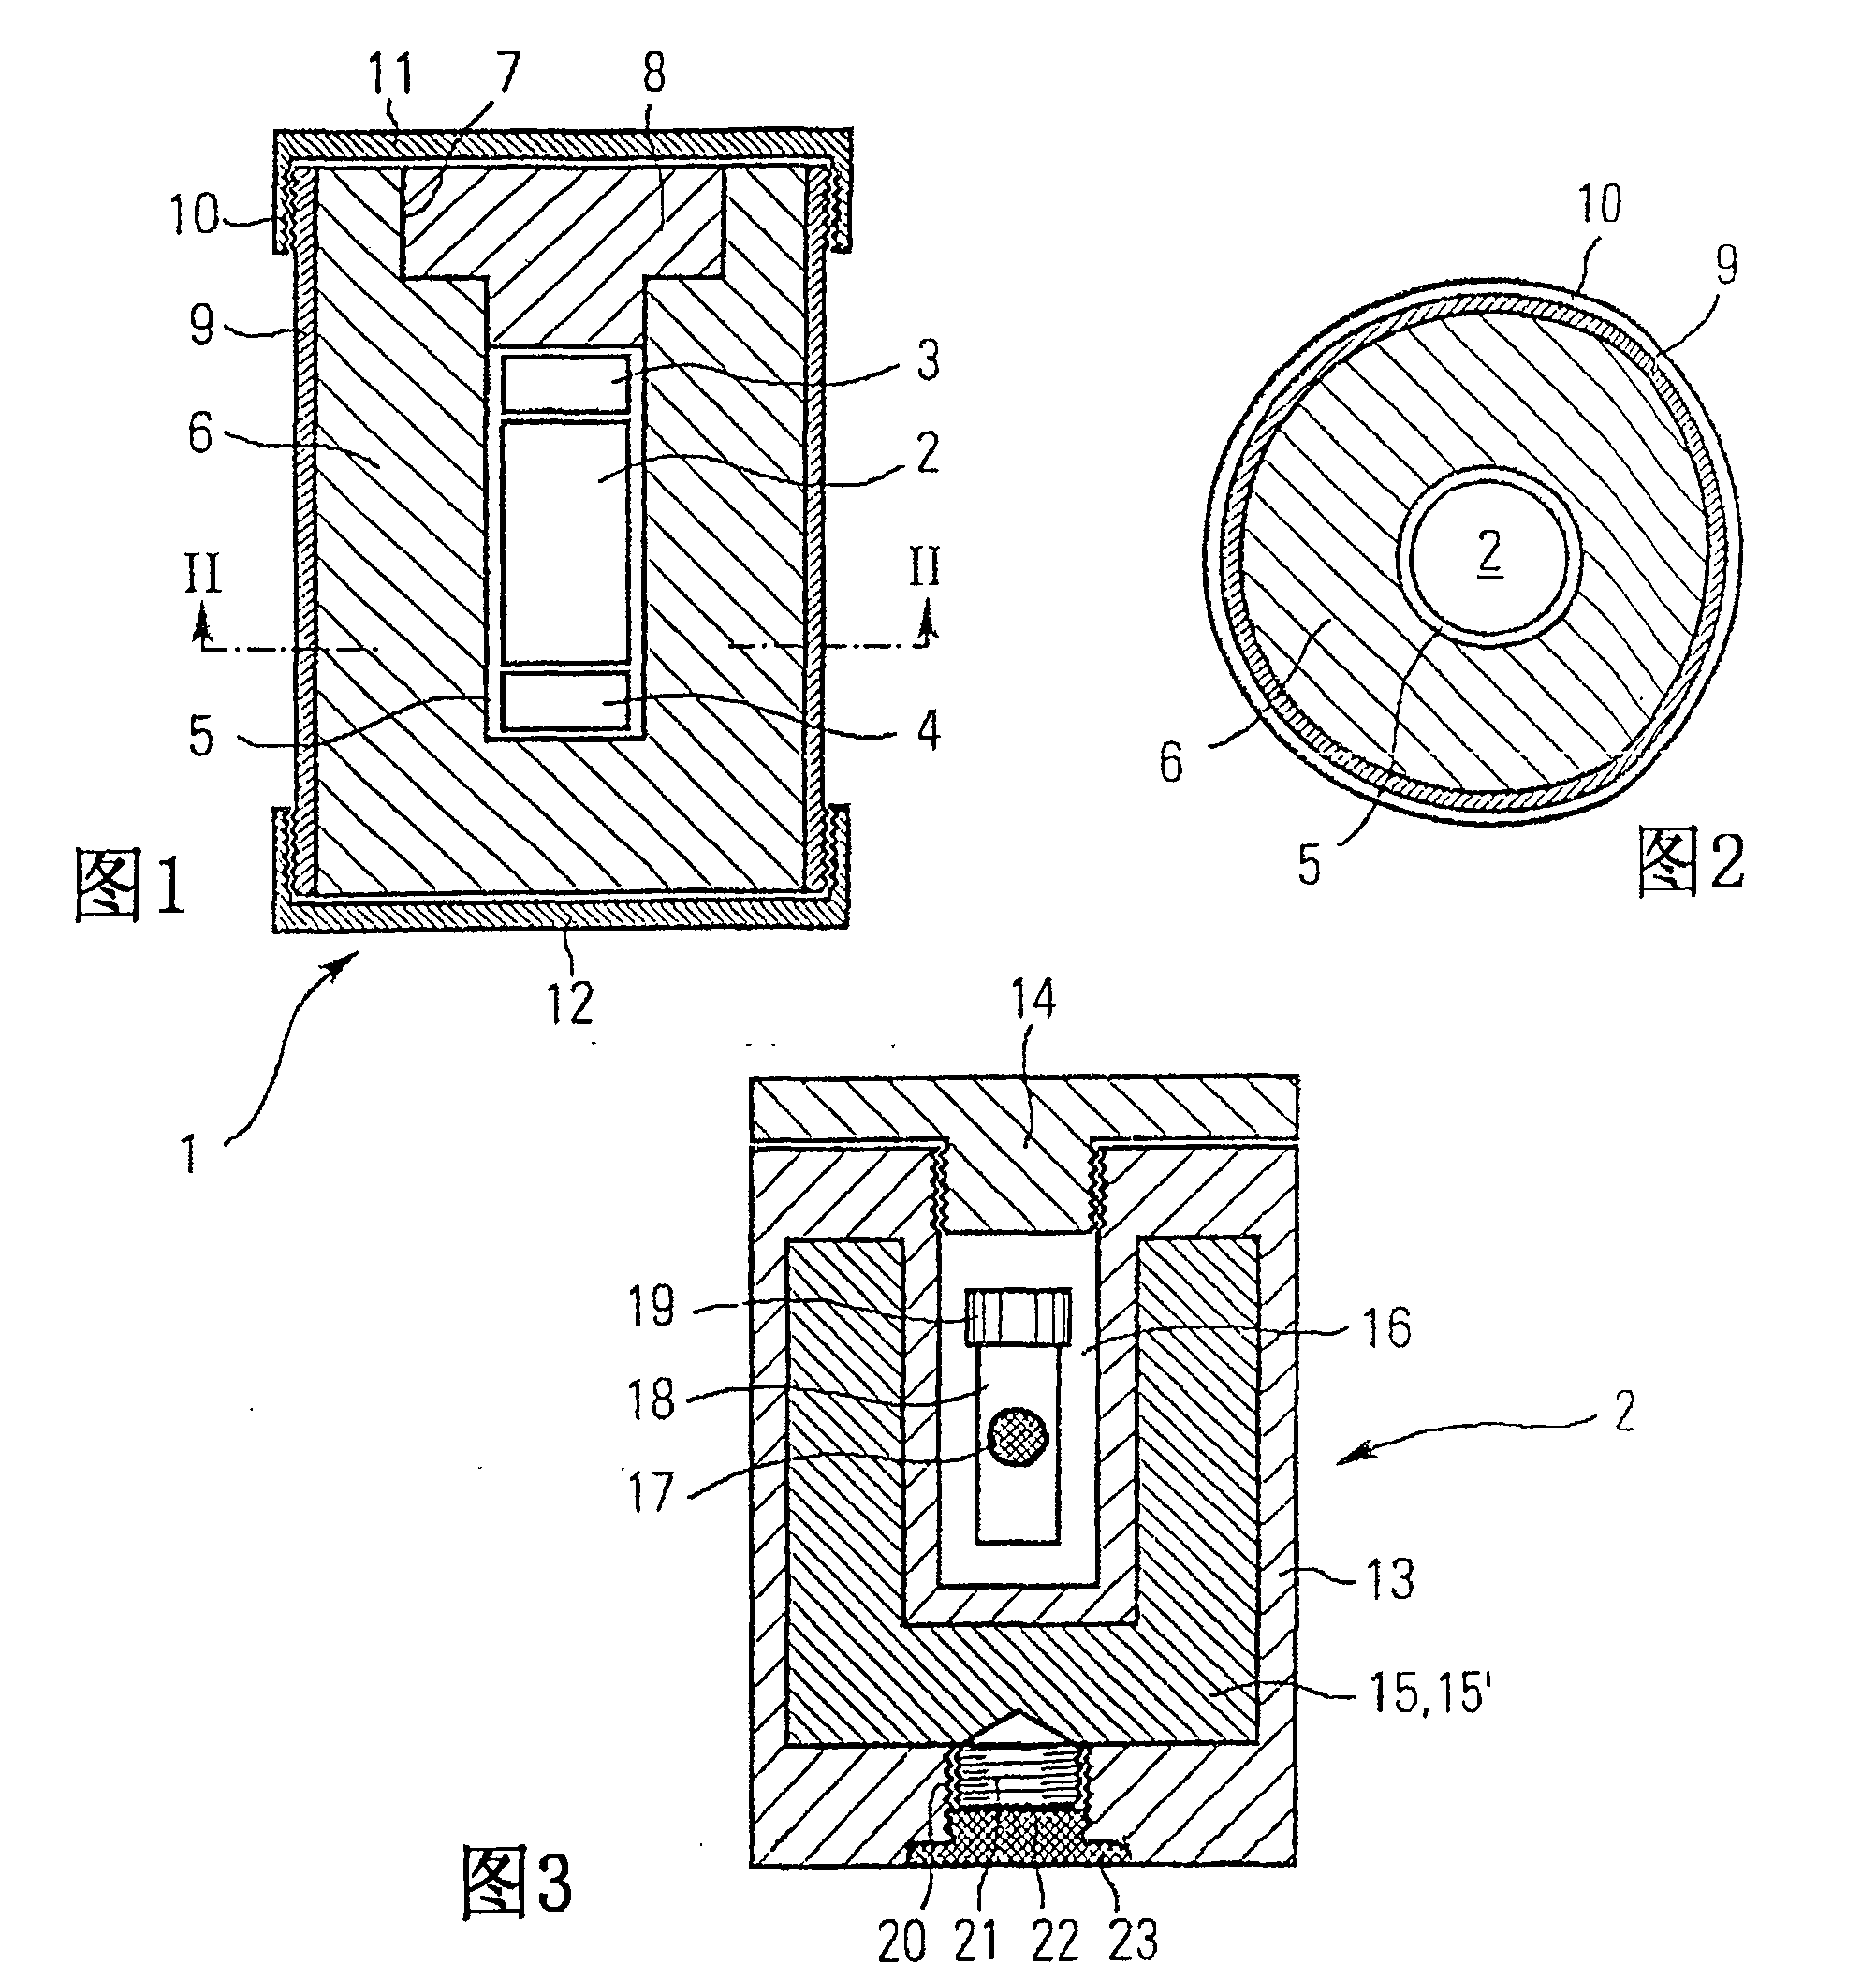 Transport container for keeping frozen material chilled